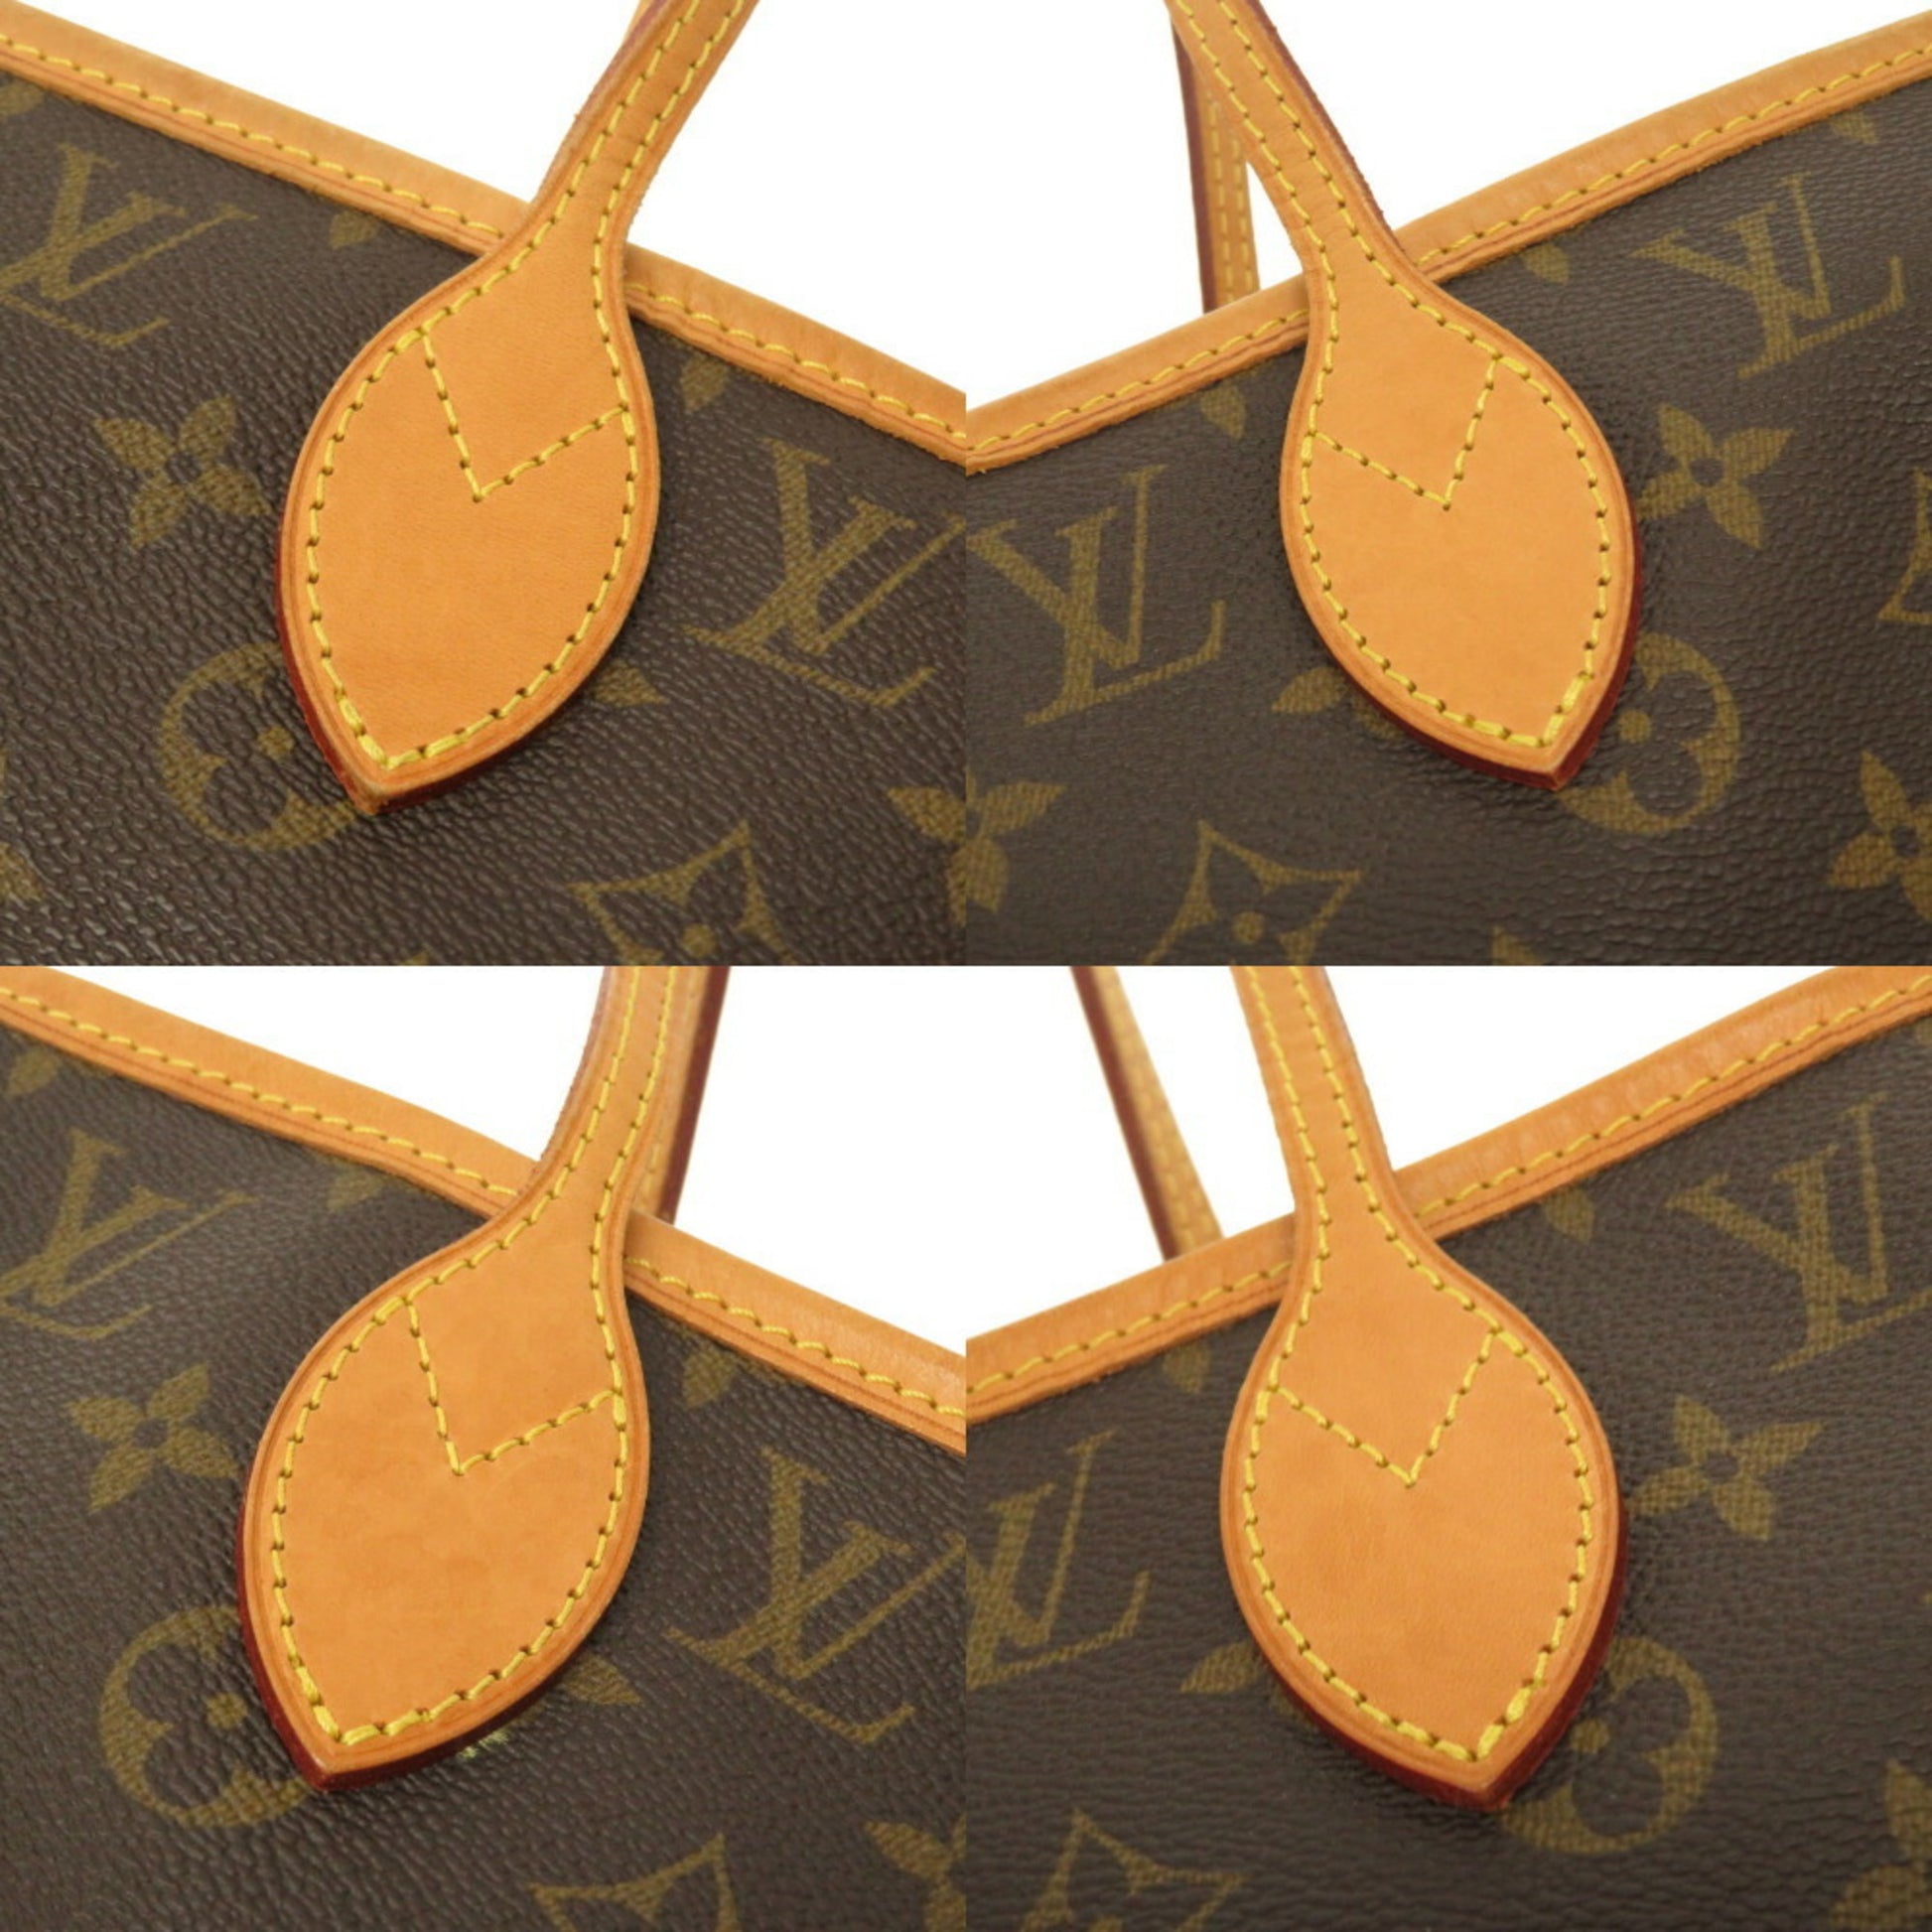 Auth NCB01 Louis Vuitton Monogram Neverfull MM M40156 Tote Bag from Japan